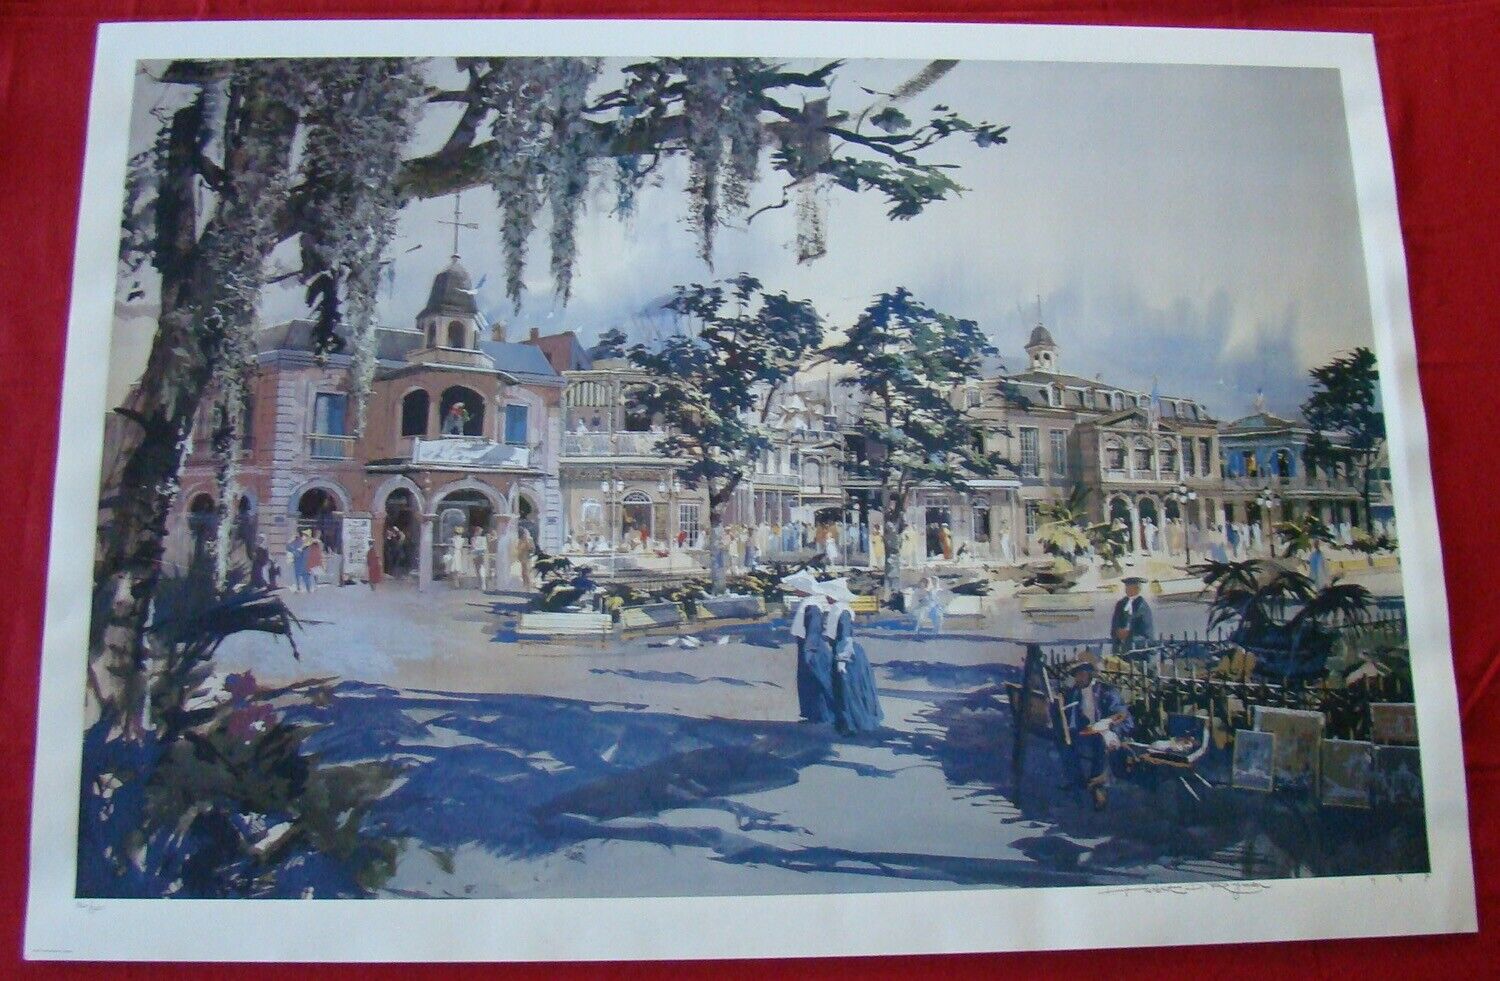 Herb Ryman Signed Disneyland New Orleans Square Concept Art Lithograph #187/300!